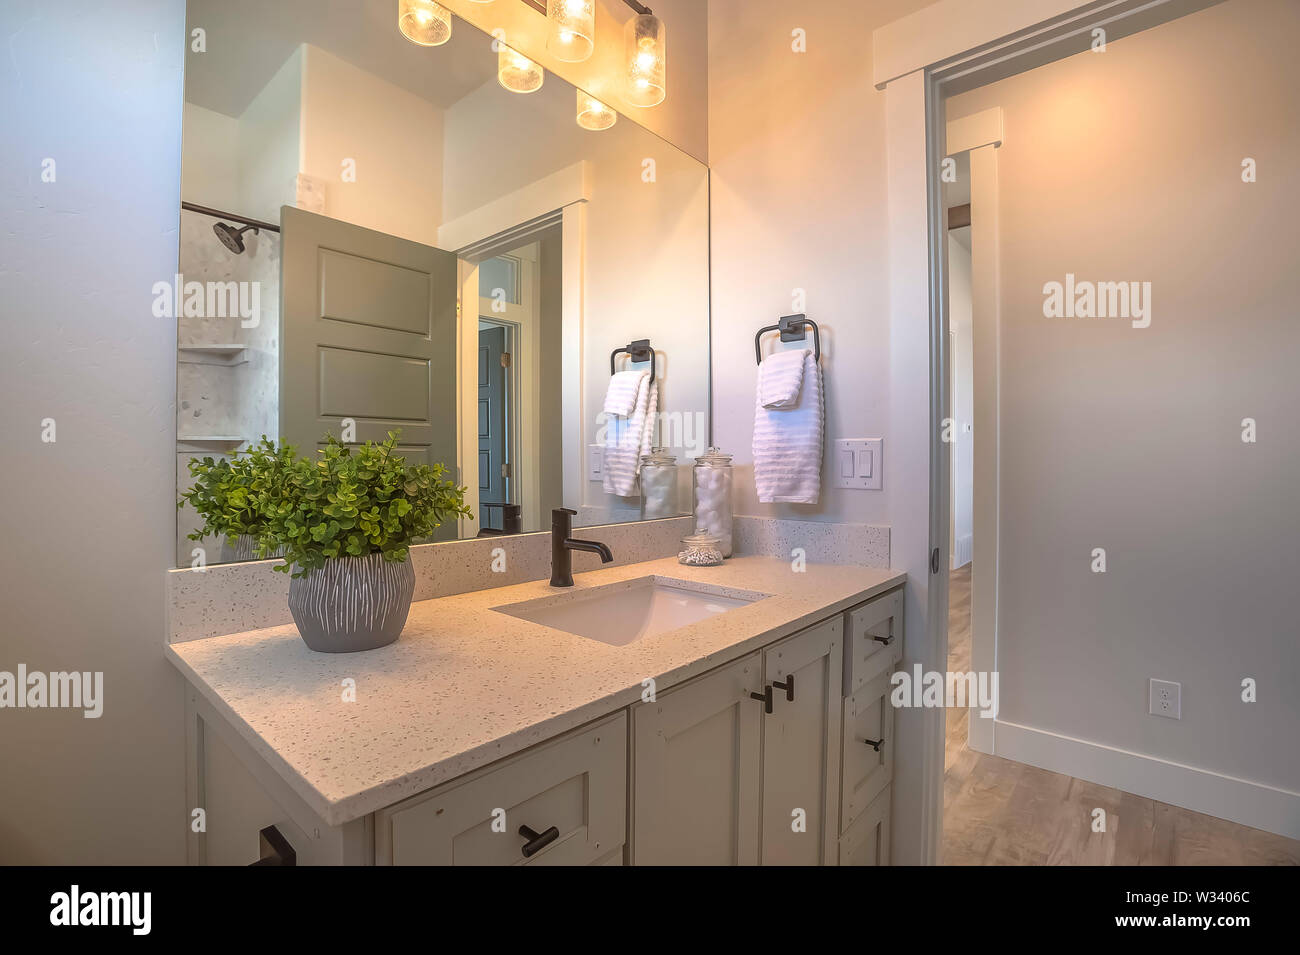 Mirror And Vanity Unit Inside A Bathroom With White Wall And Brown Wood Floor Wood Cabinets Are Beneath The White Countertop With A Single Basin Sink Stock Photo Alamy